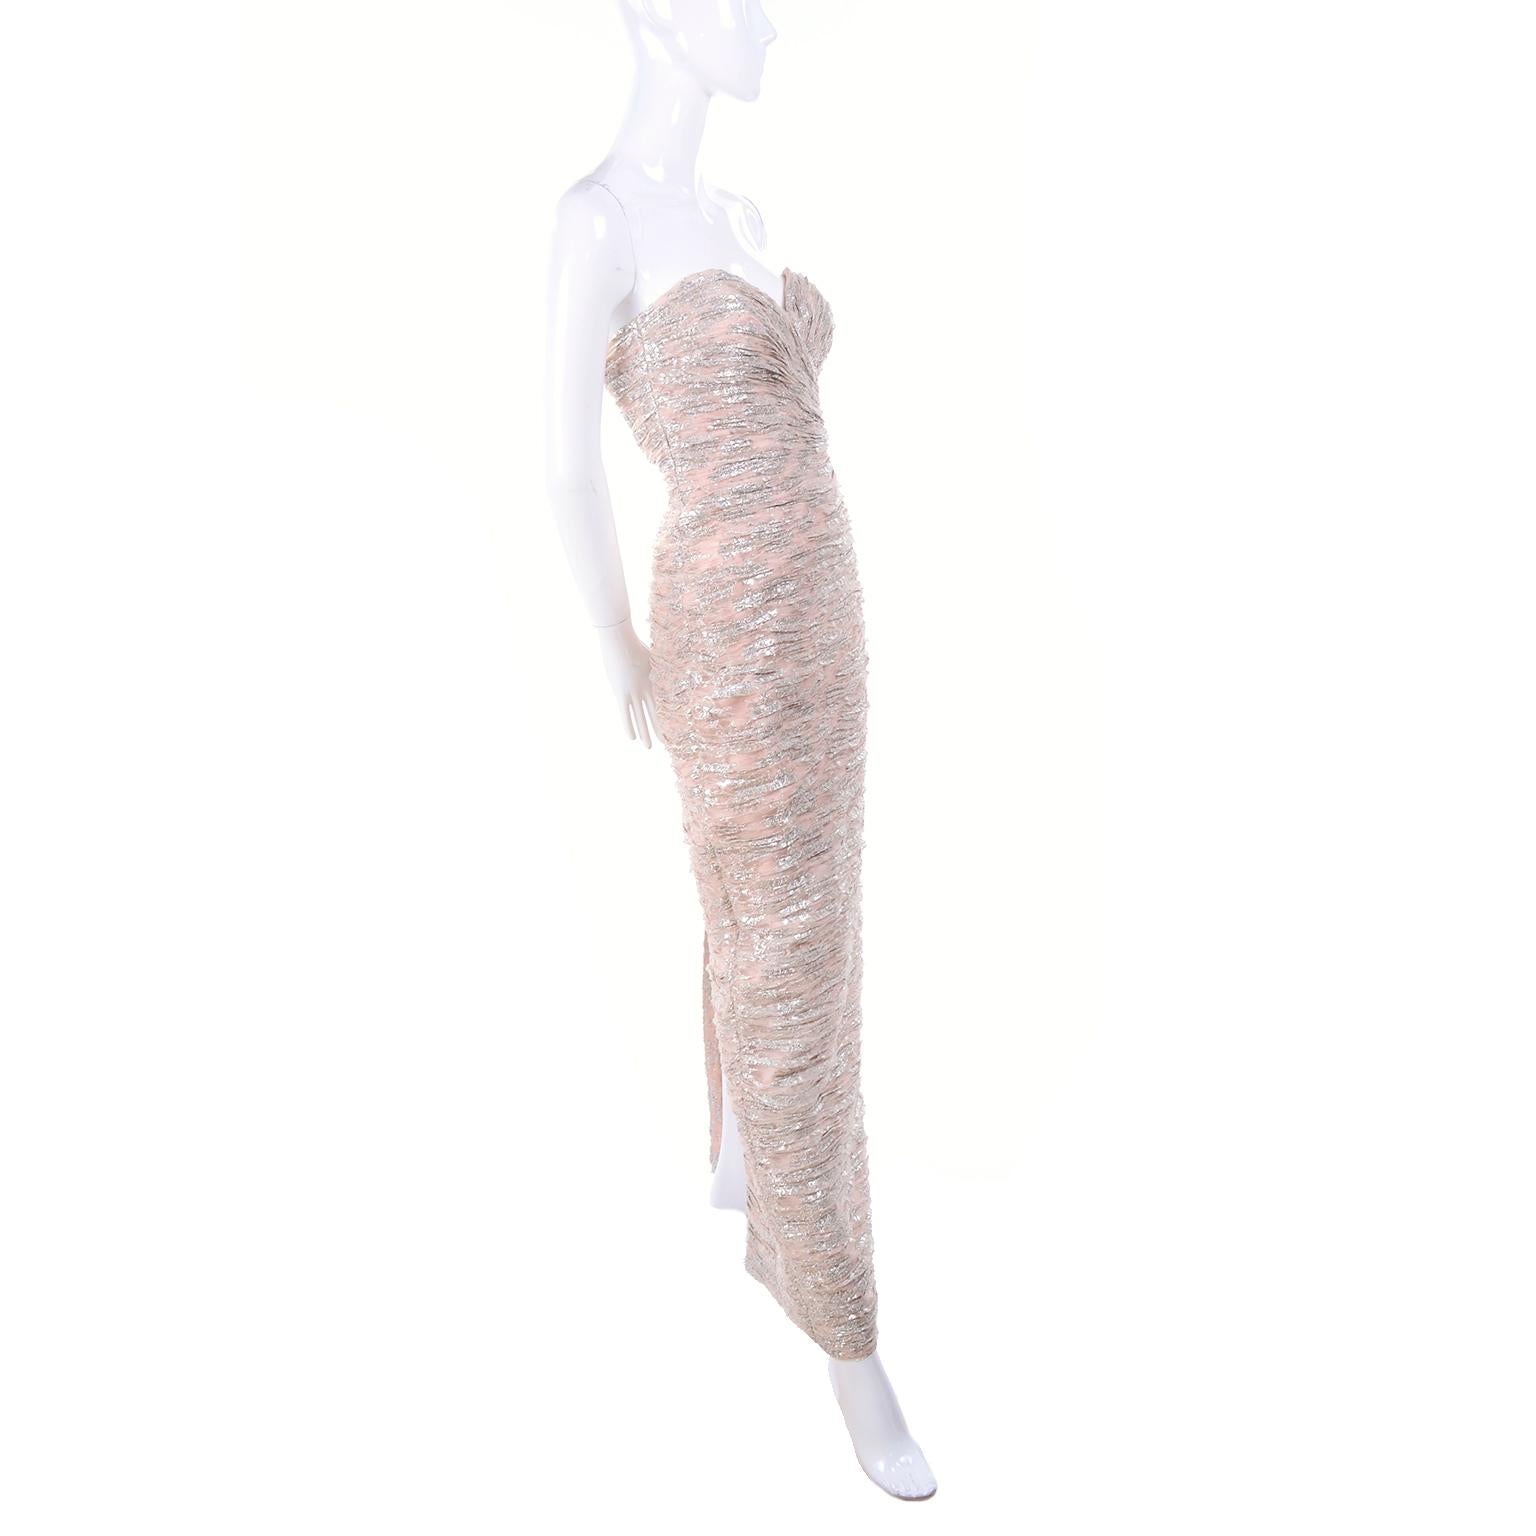 This Vicky Tiel strapless, ruchéd pale buff pink and silver metallic evening gown has a sweetheart neckline and is new with its original price tag for over $900. There is a back hidden zipper and hook and eye for closure and the dress is fully